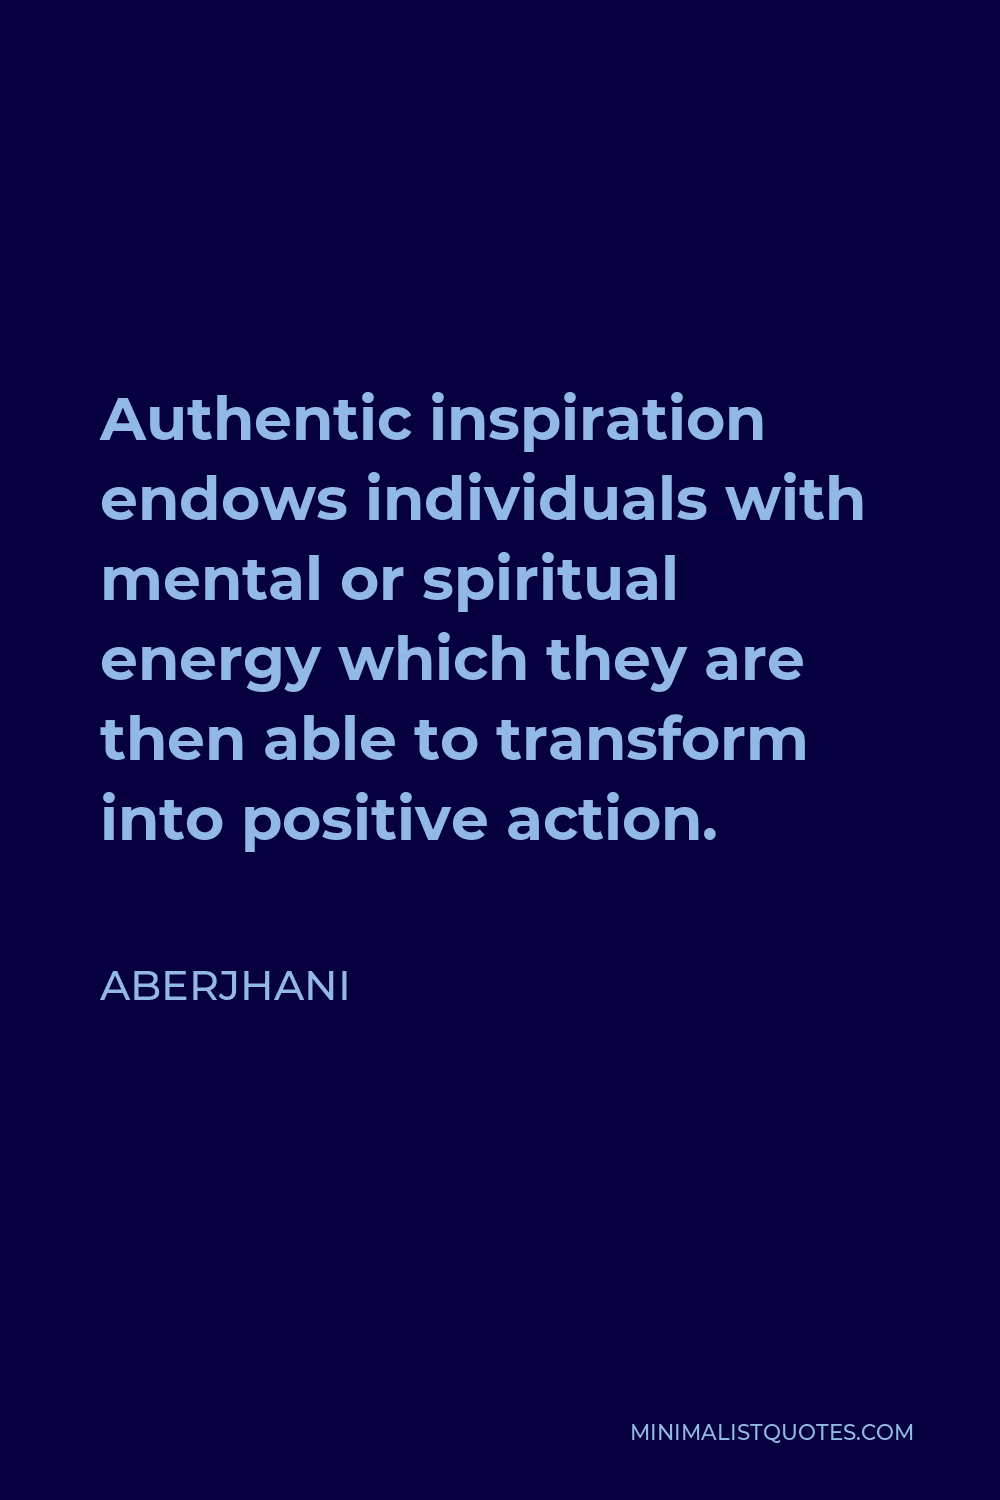 Aberjhani Quote - Authentic inspiration endows individuals with mental or spiritual energy which they are then able to transform into positive action.